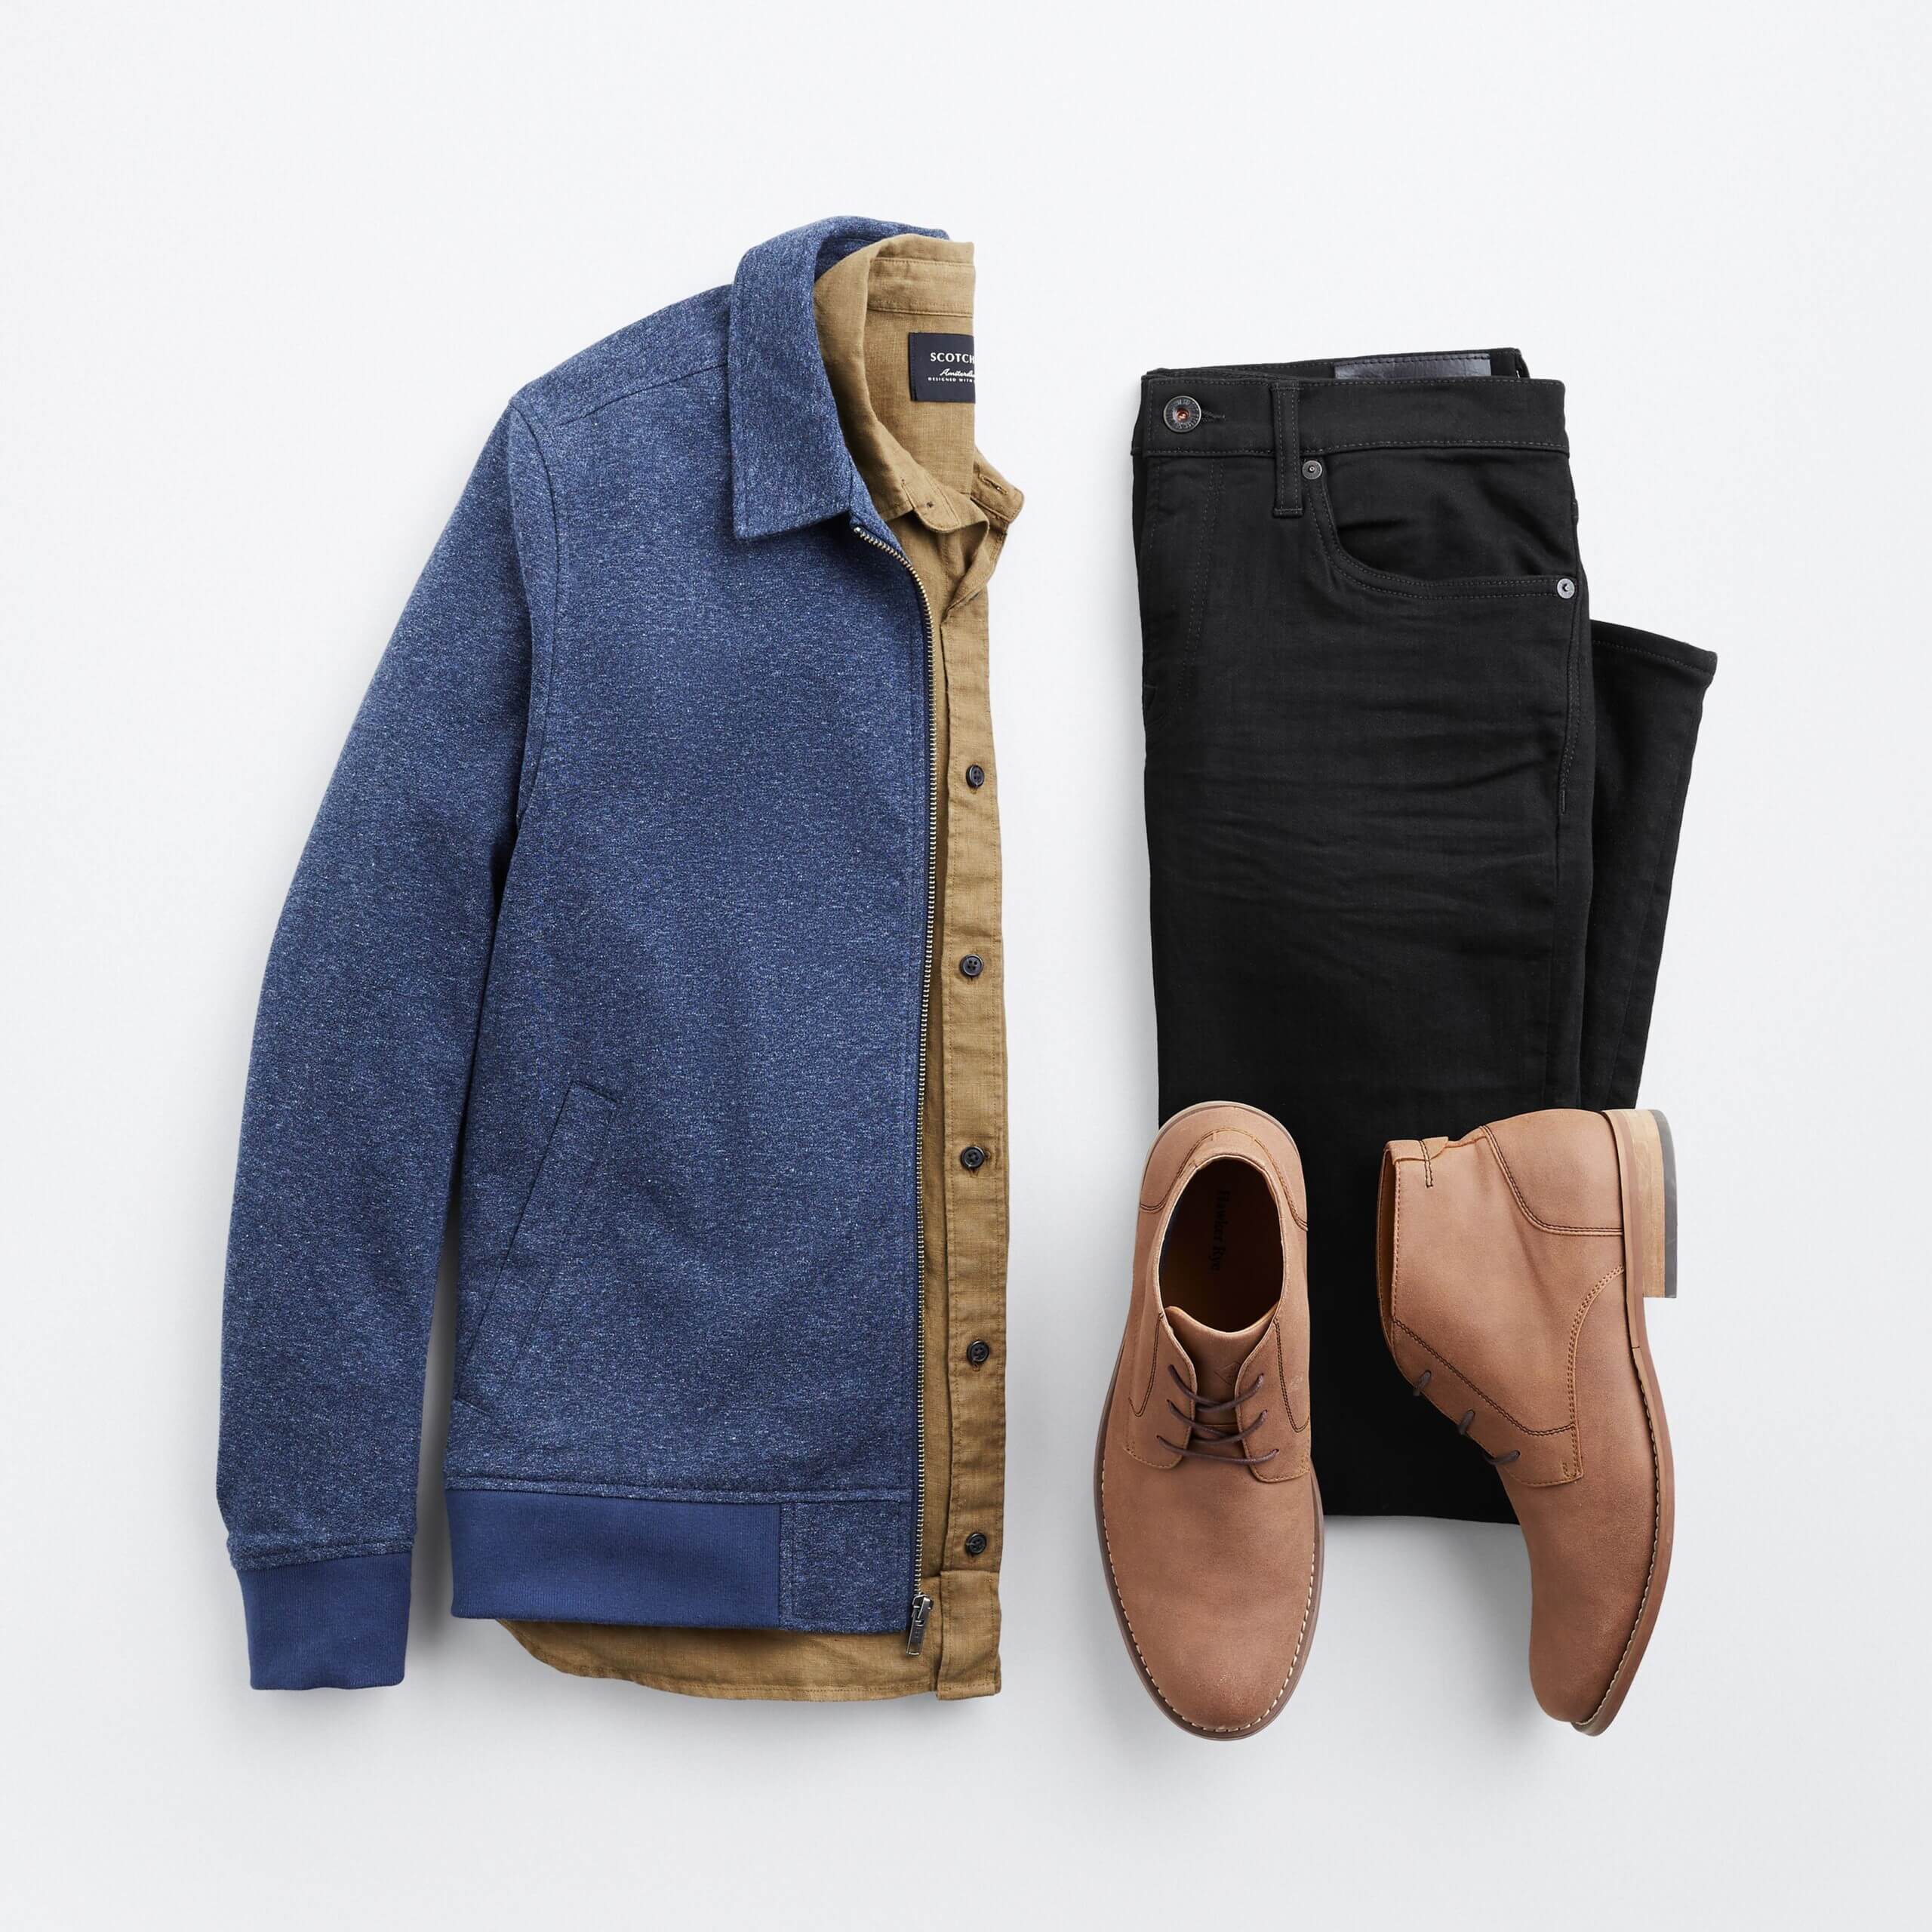 Stitch Fix men's outfit laydown featuring navy blue knit harrington jacket over olive button-down shirt with black jeans and brown chukkas.